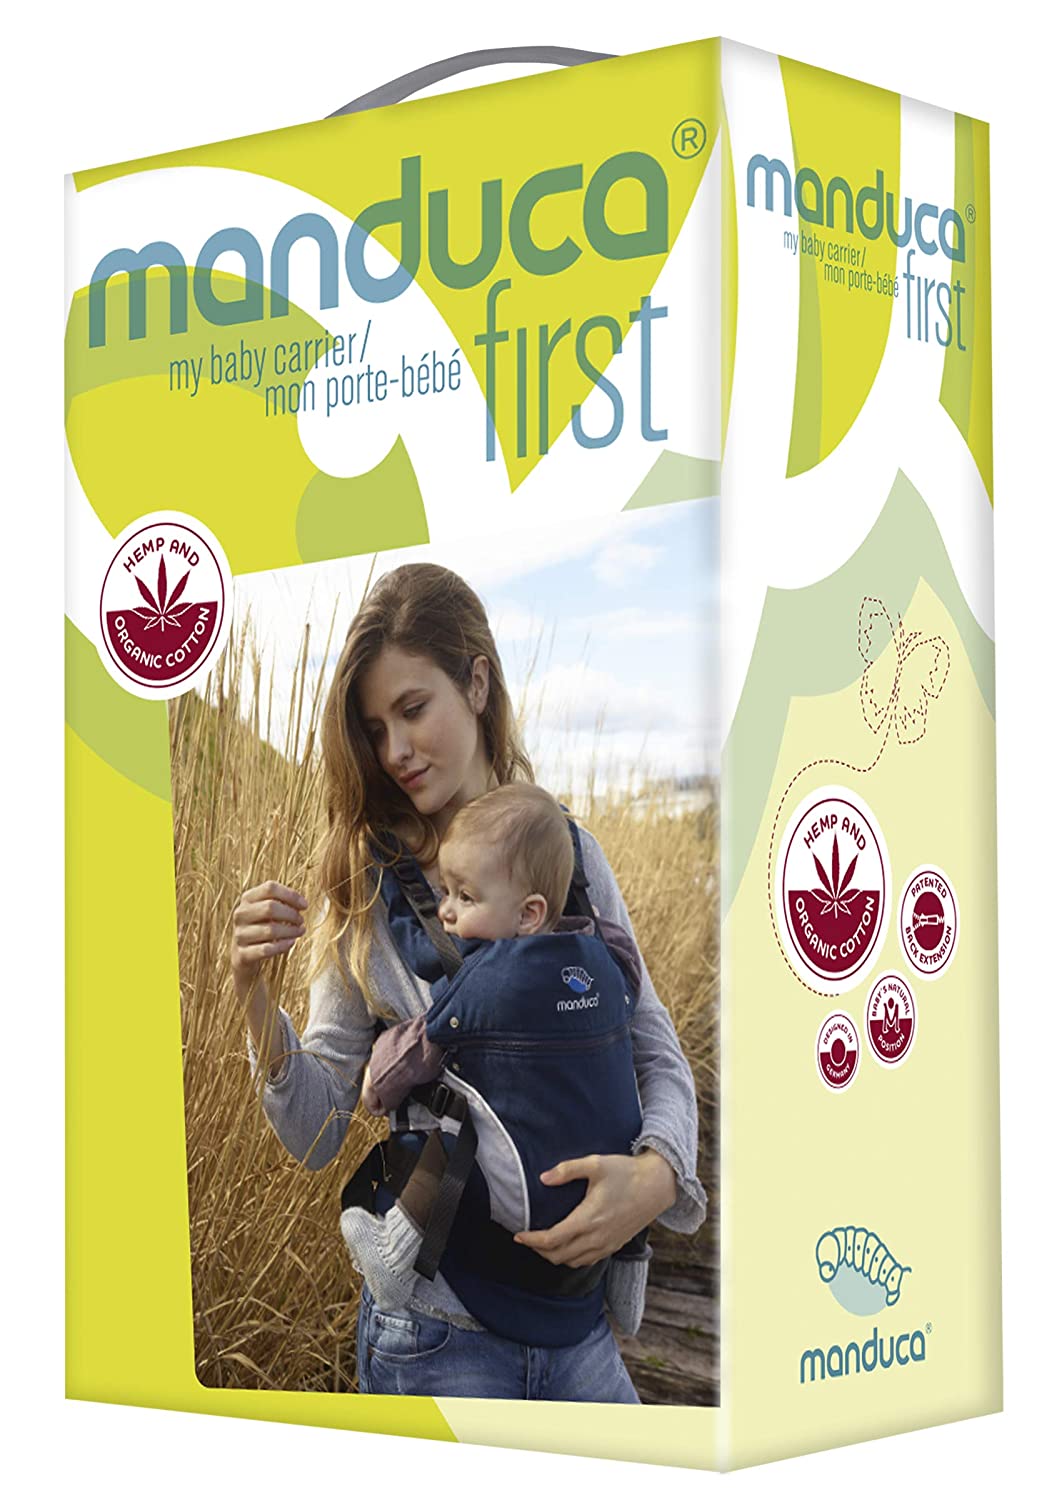 Manduca First Baby and Children’s Carrier, Hemp Cotton, Baby Carrier Made from Soft Canvas (Hemp and Organic Cotton) with Back Extension and Ergonomic Waist Belt